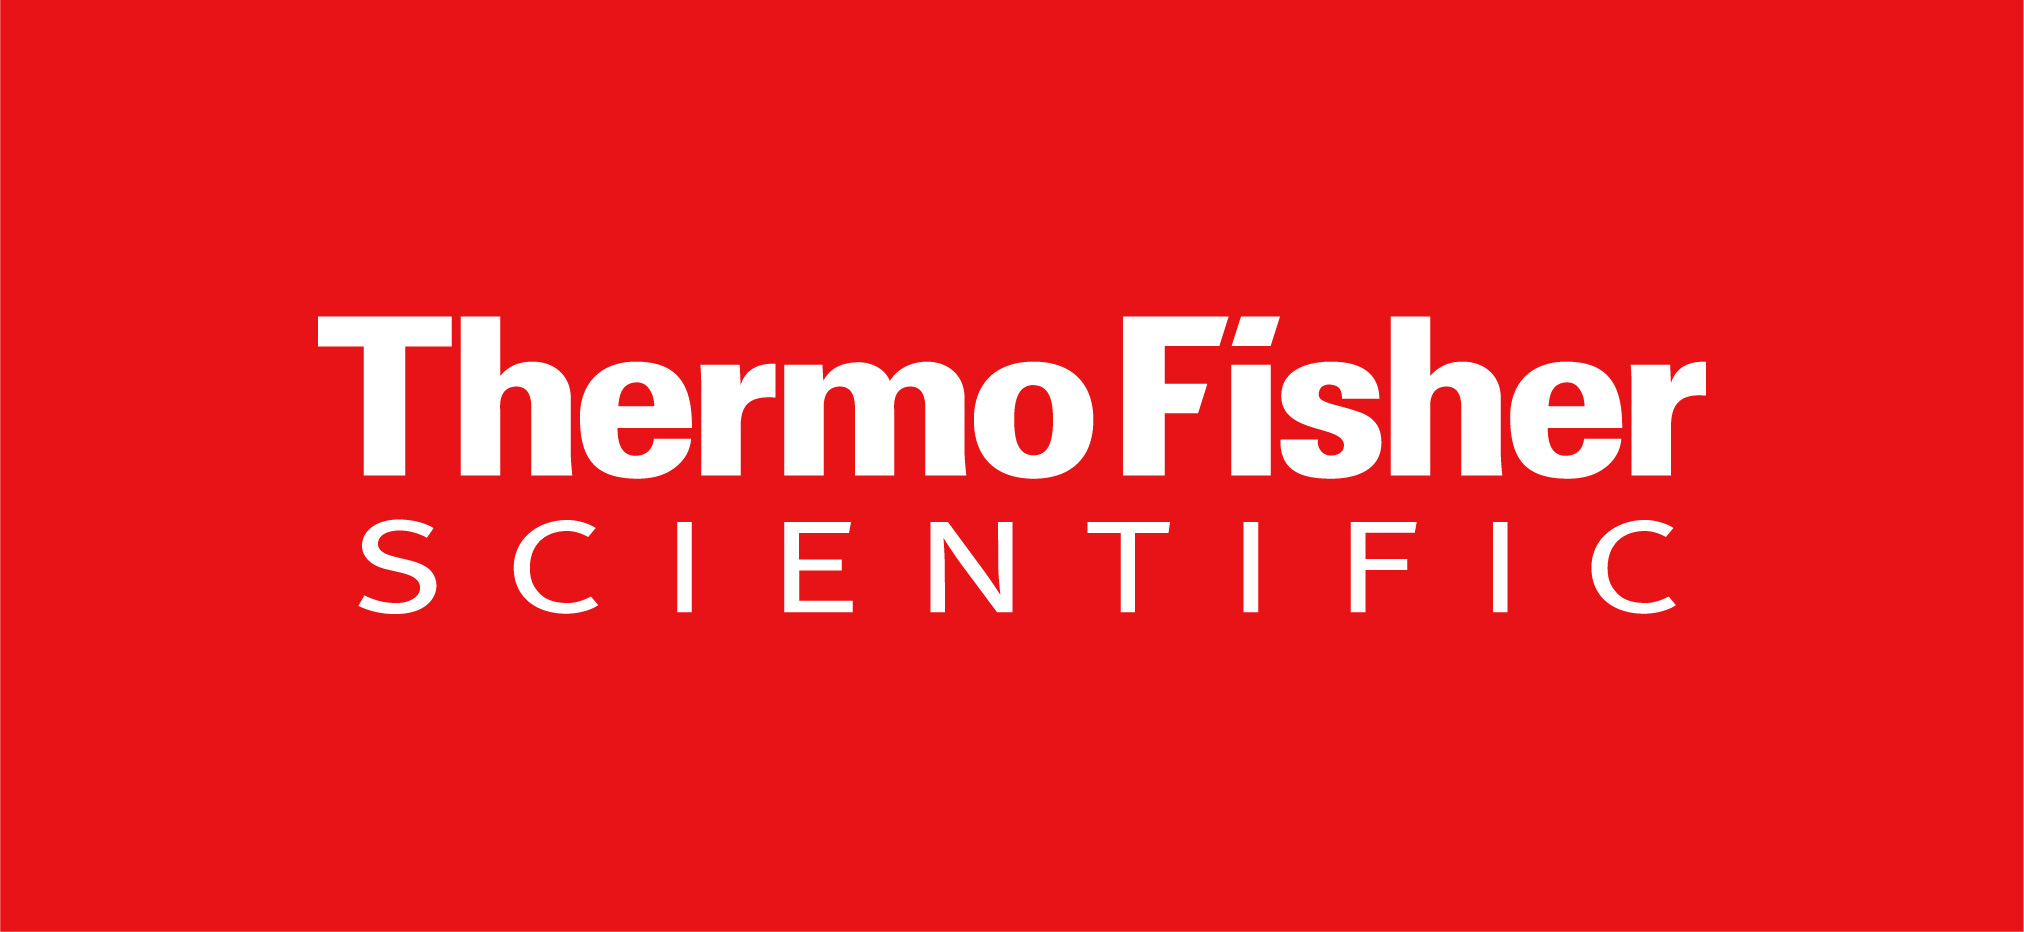 ThermoFisher Scientific logo-red